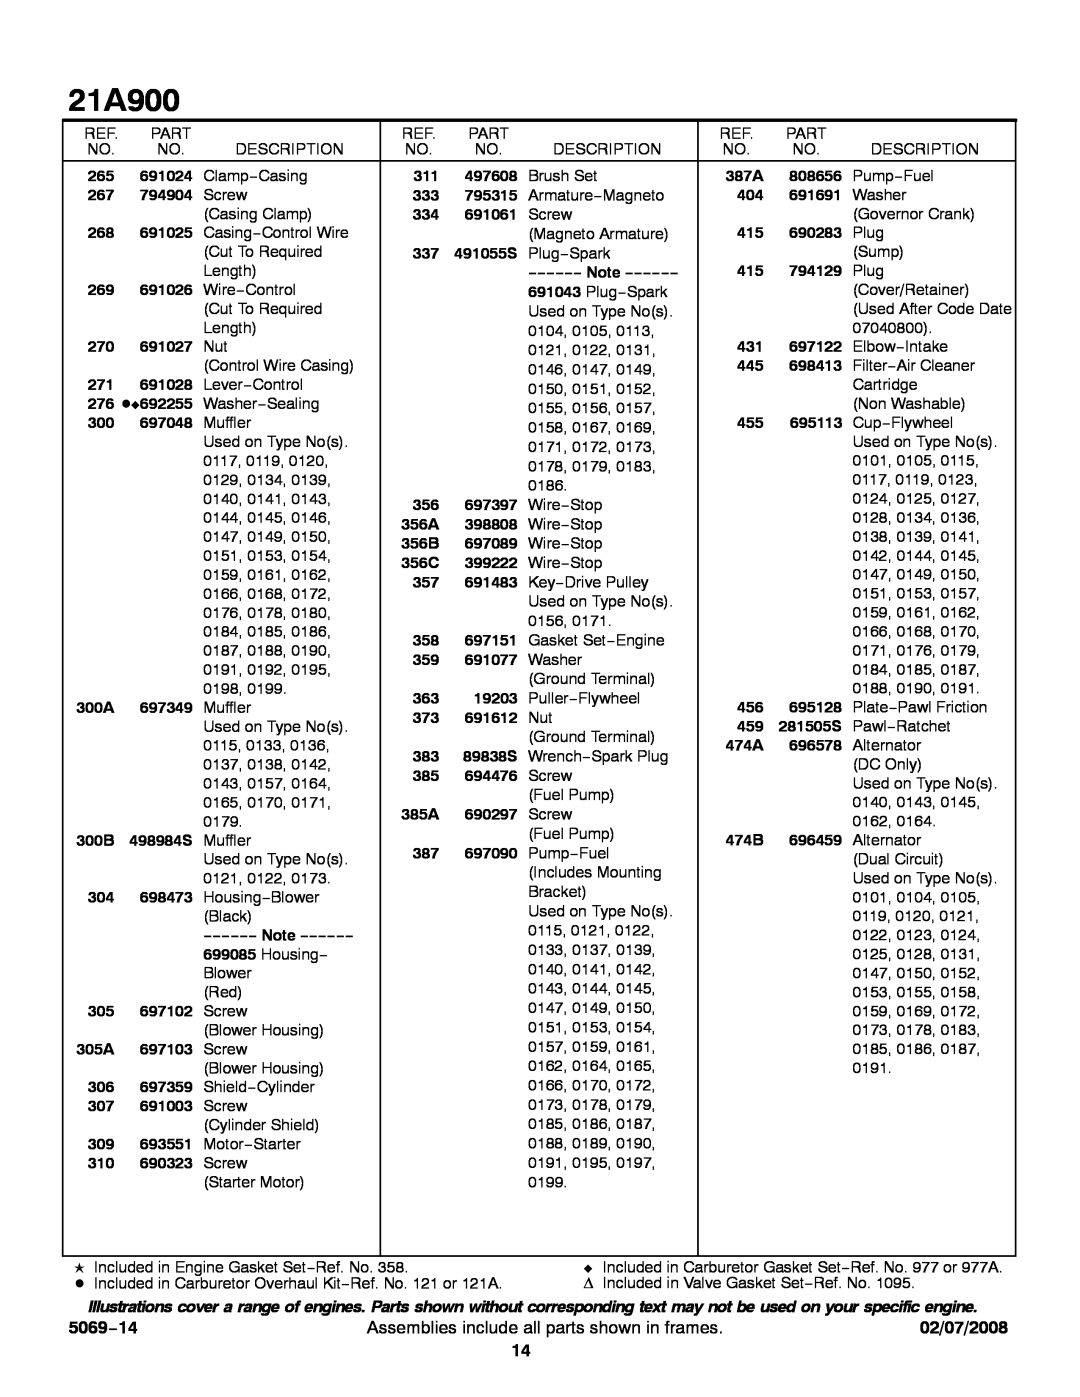 Briggs & Stratton 21A900 service manual 5069−14, Assemblies include all parts shown in frames, 02/07/2008 